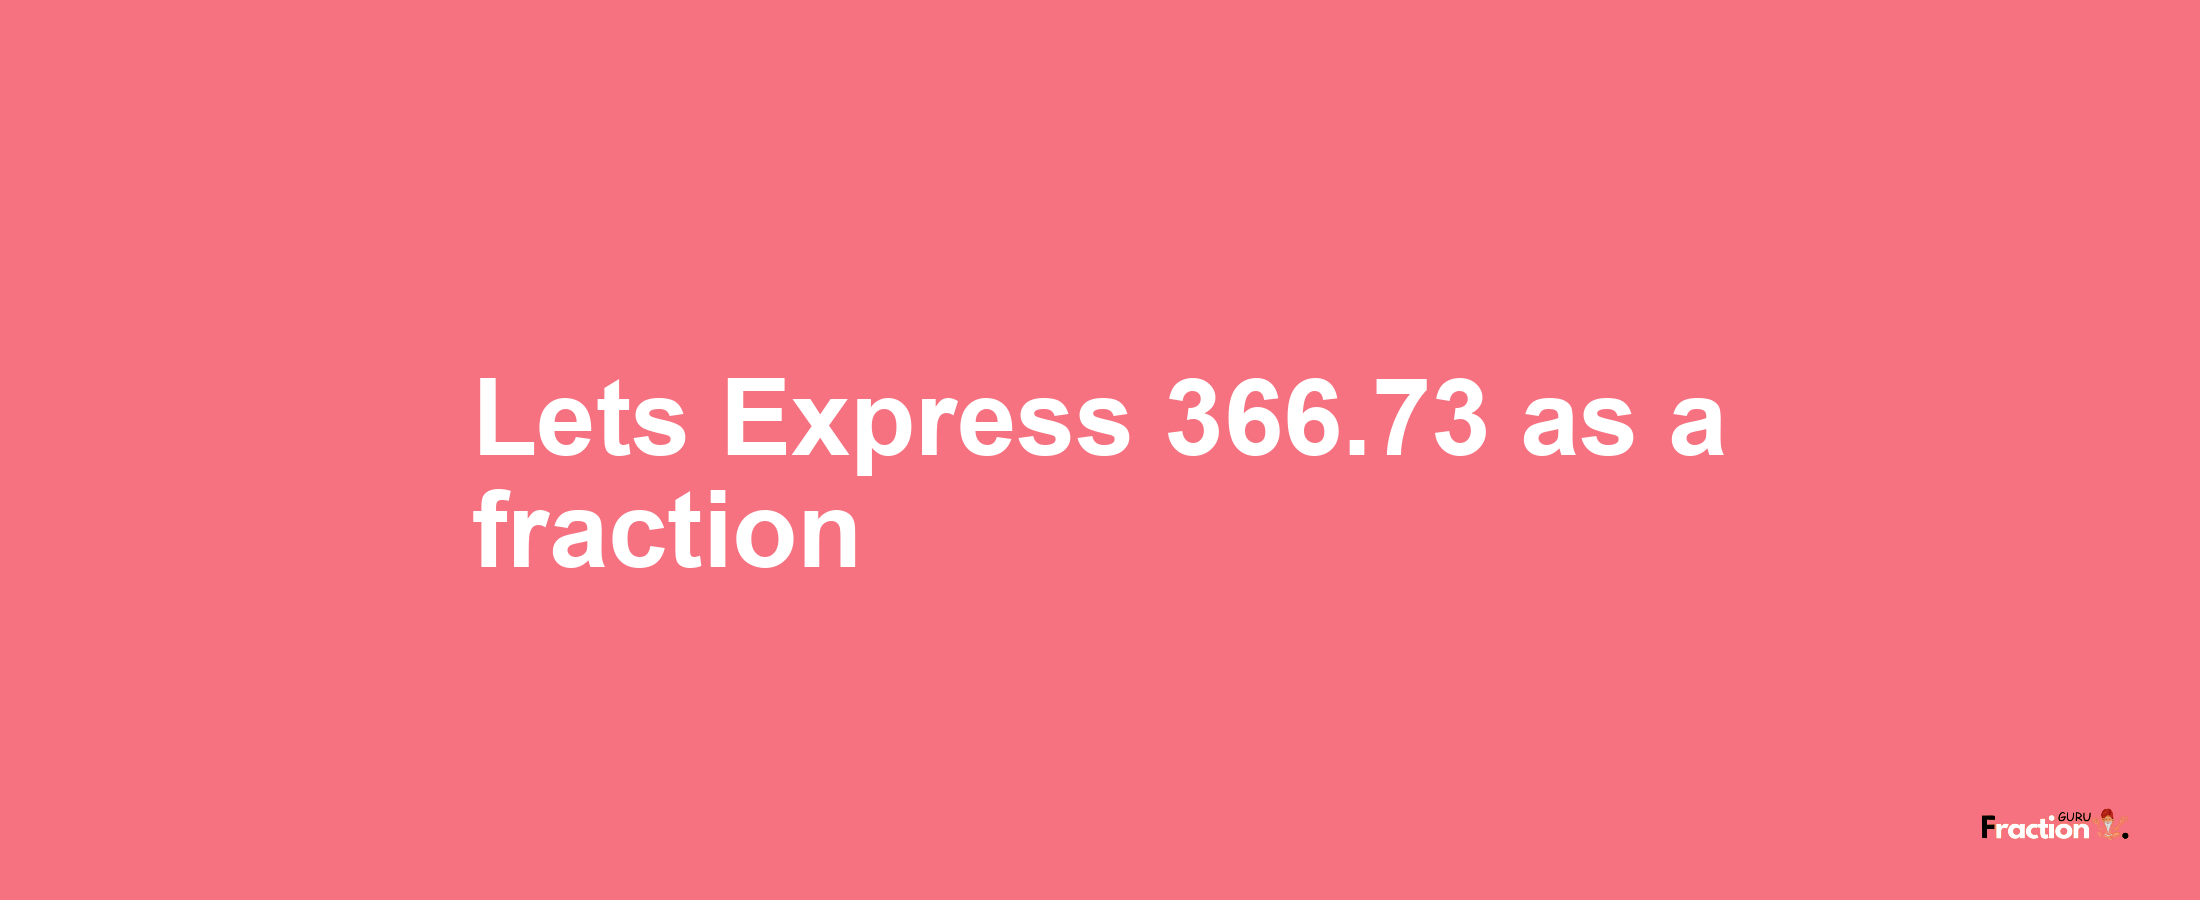 Lets Express 366.73 as afraction